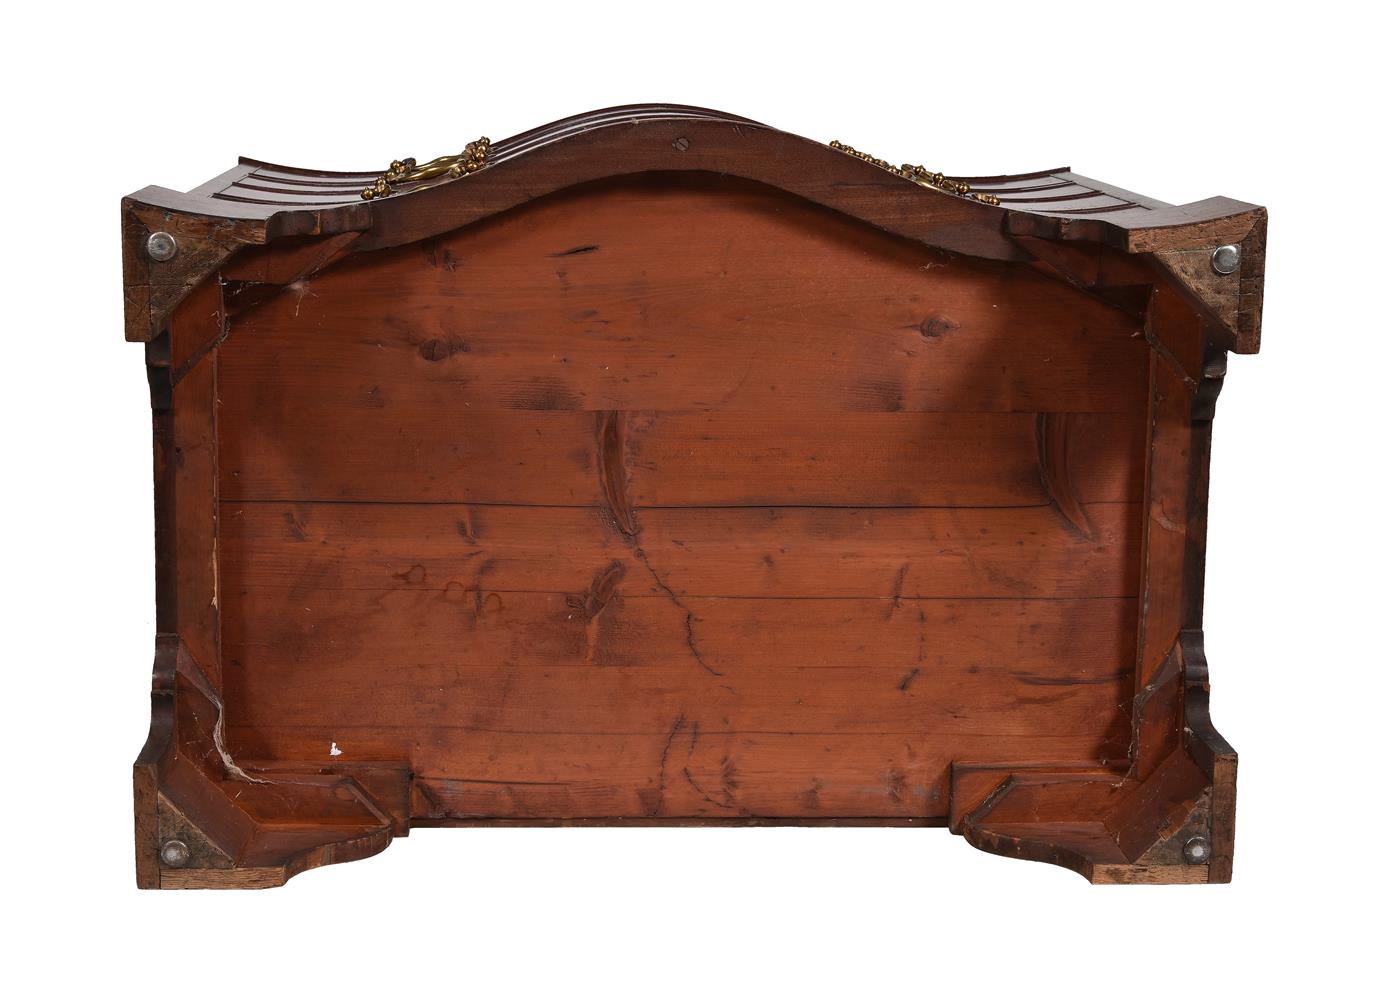 AN EARLY GEORGE III MAHOGANY SERPENTINE COMMODE, IN THE MANNER OF THOMAS CHIPPENDALE, CIRCA 1760 - Image 7 of 8